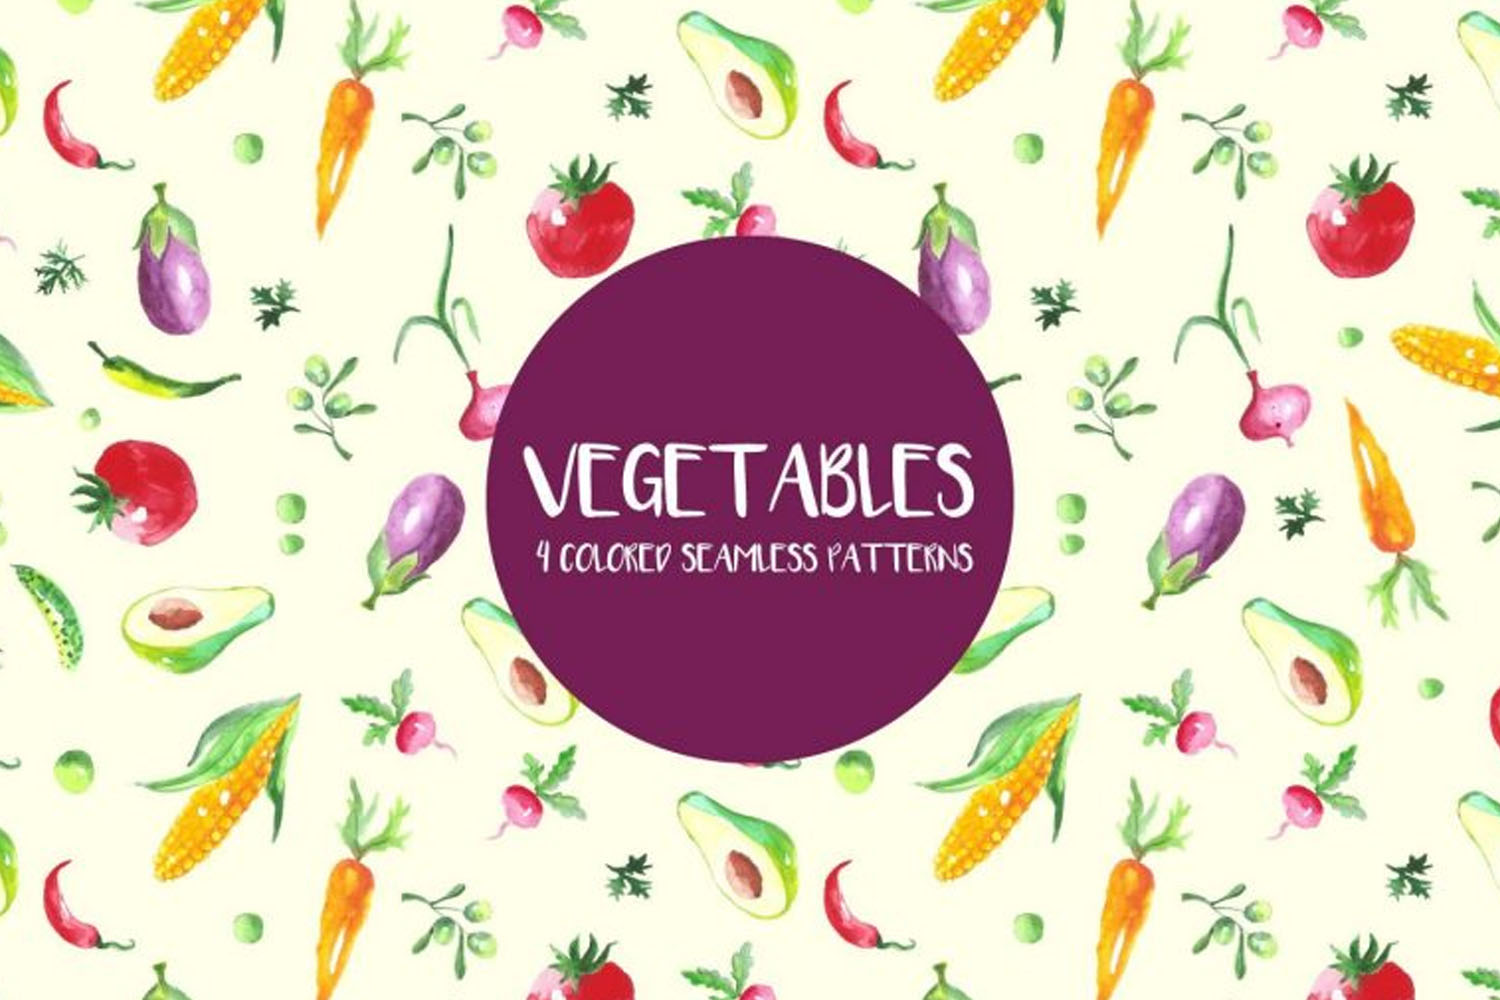 Watercolor Vegetables Seamless Patterns Download